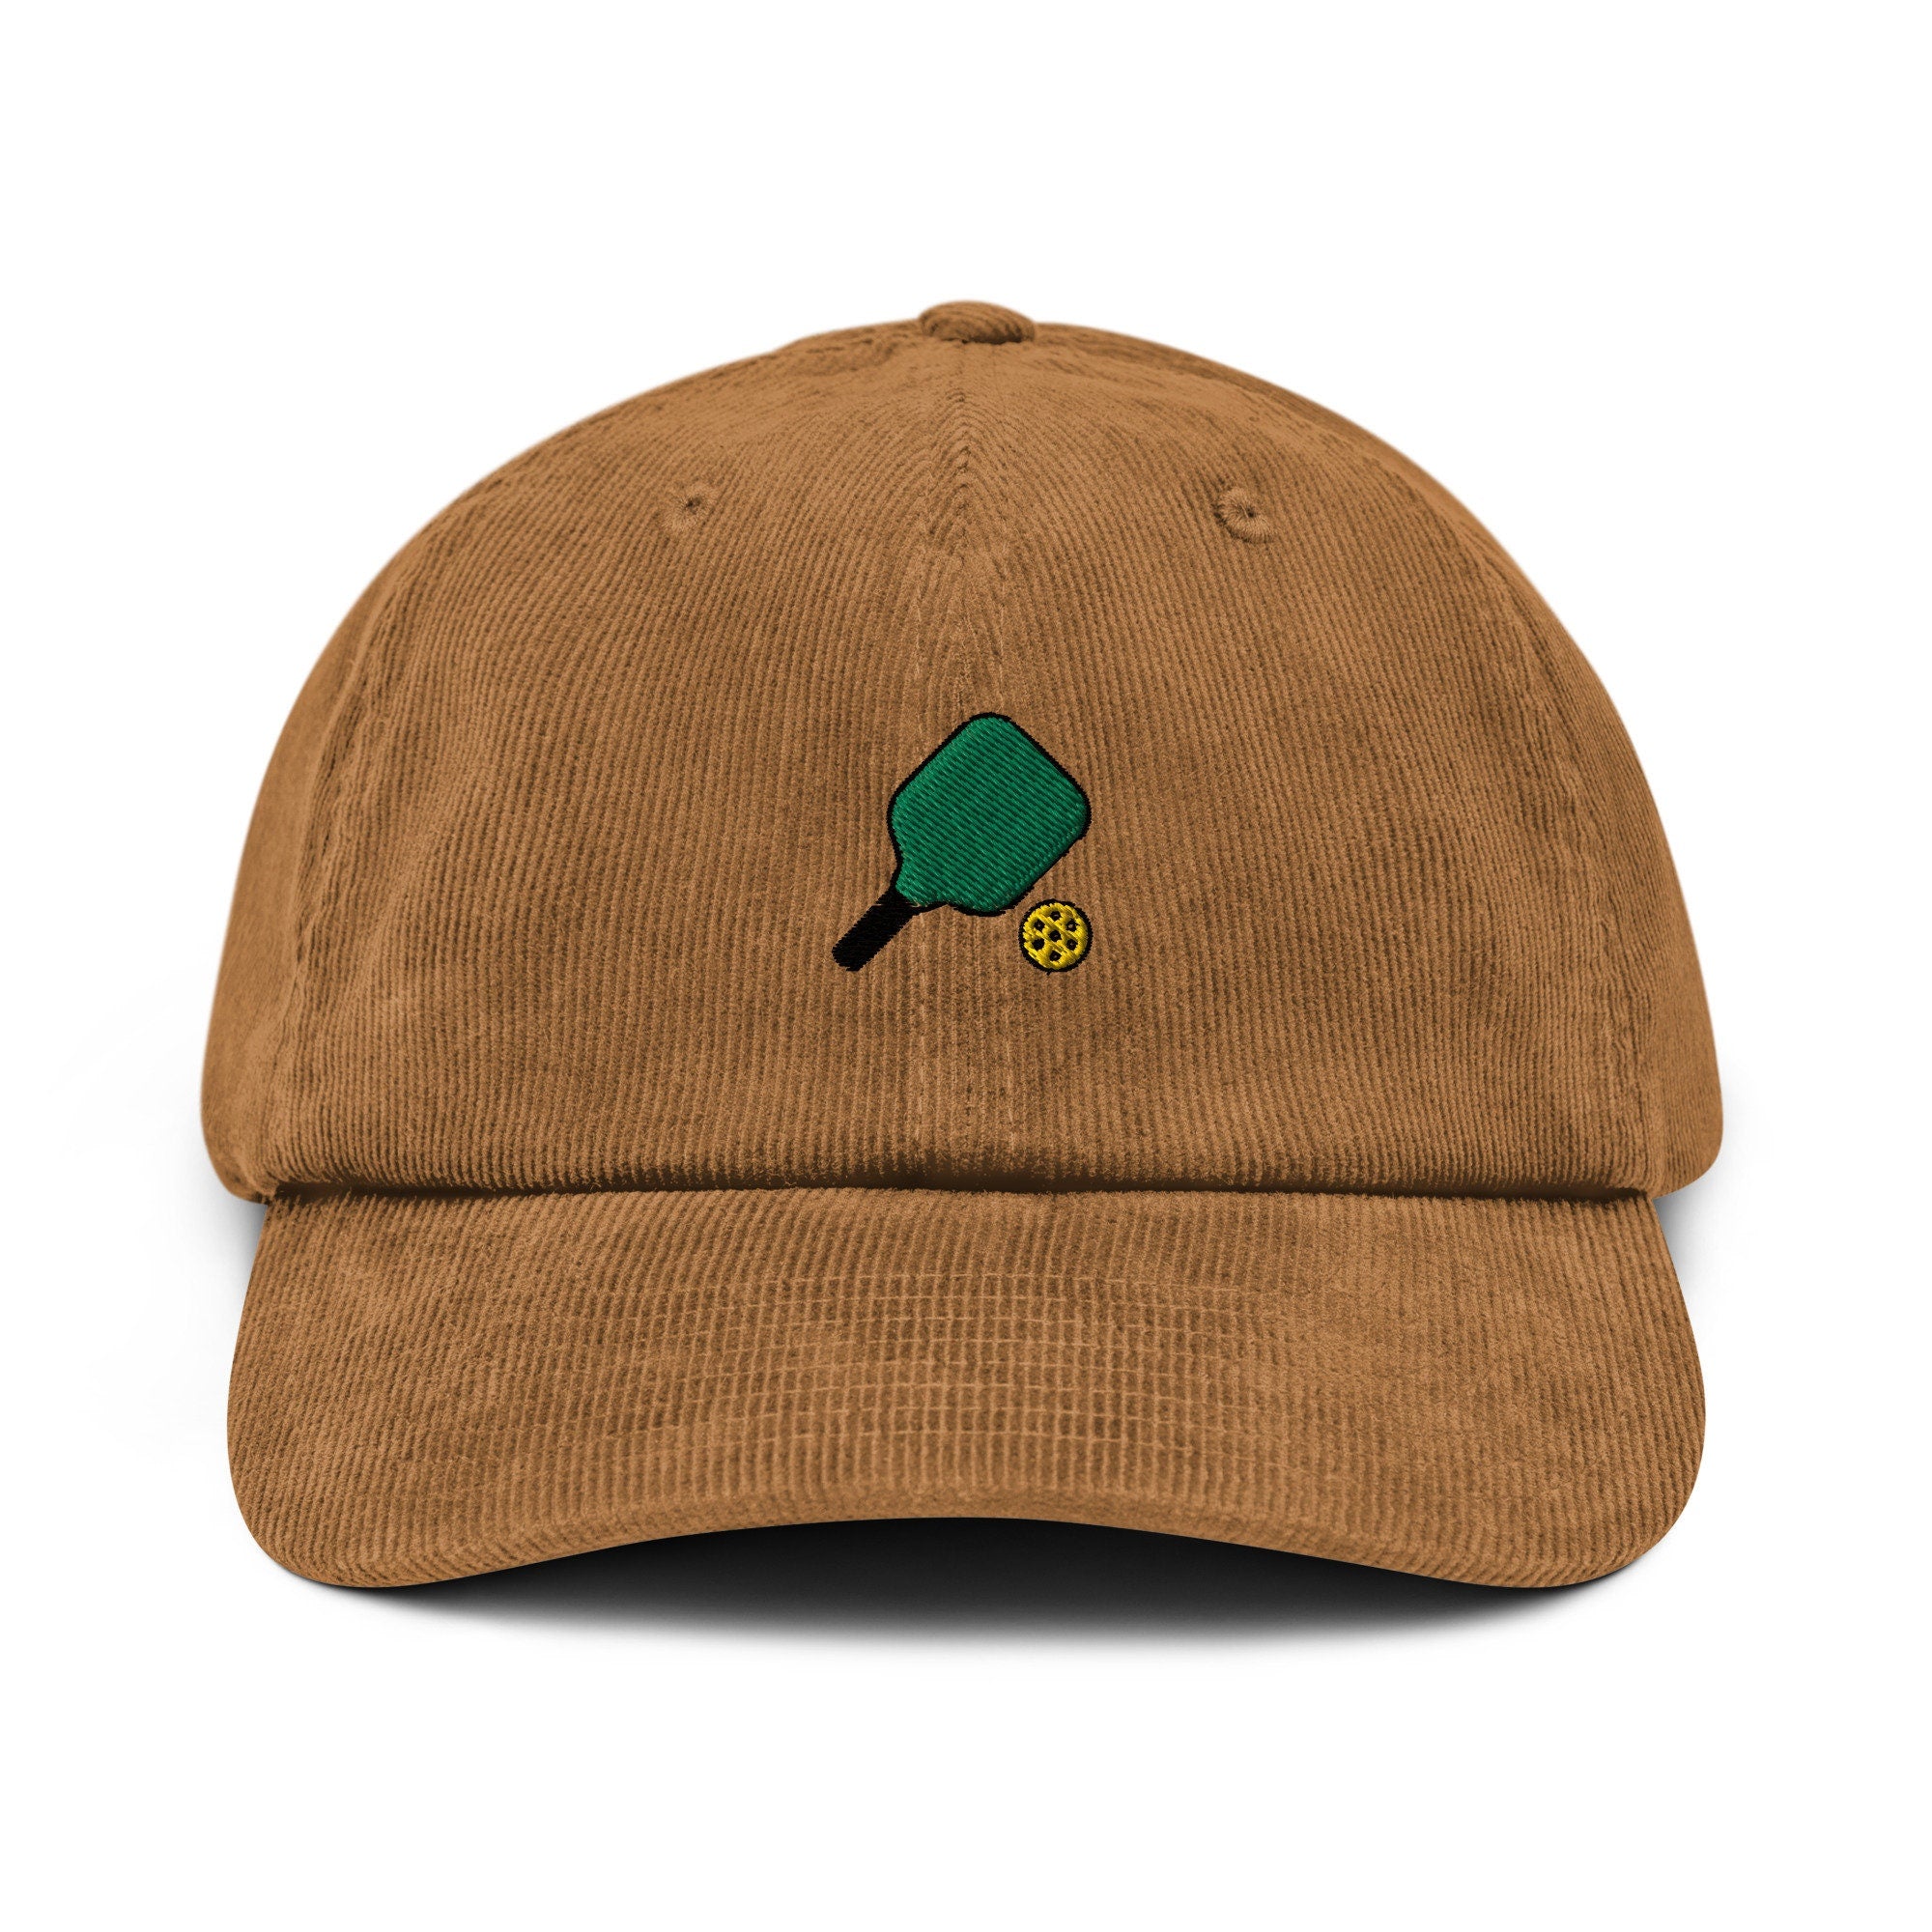 Pickleball Lover Corduroy Hat, Handmade Embroidered Corduroy Dad Cap - Multiple Colors